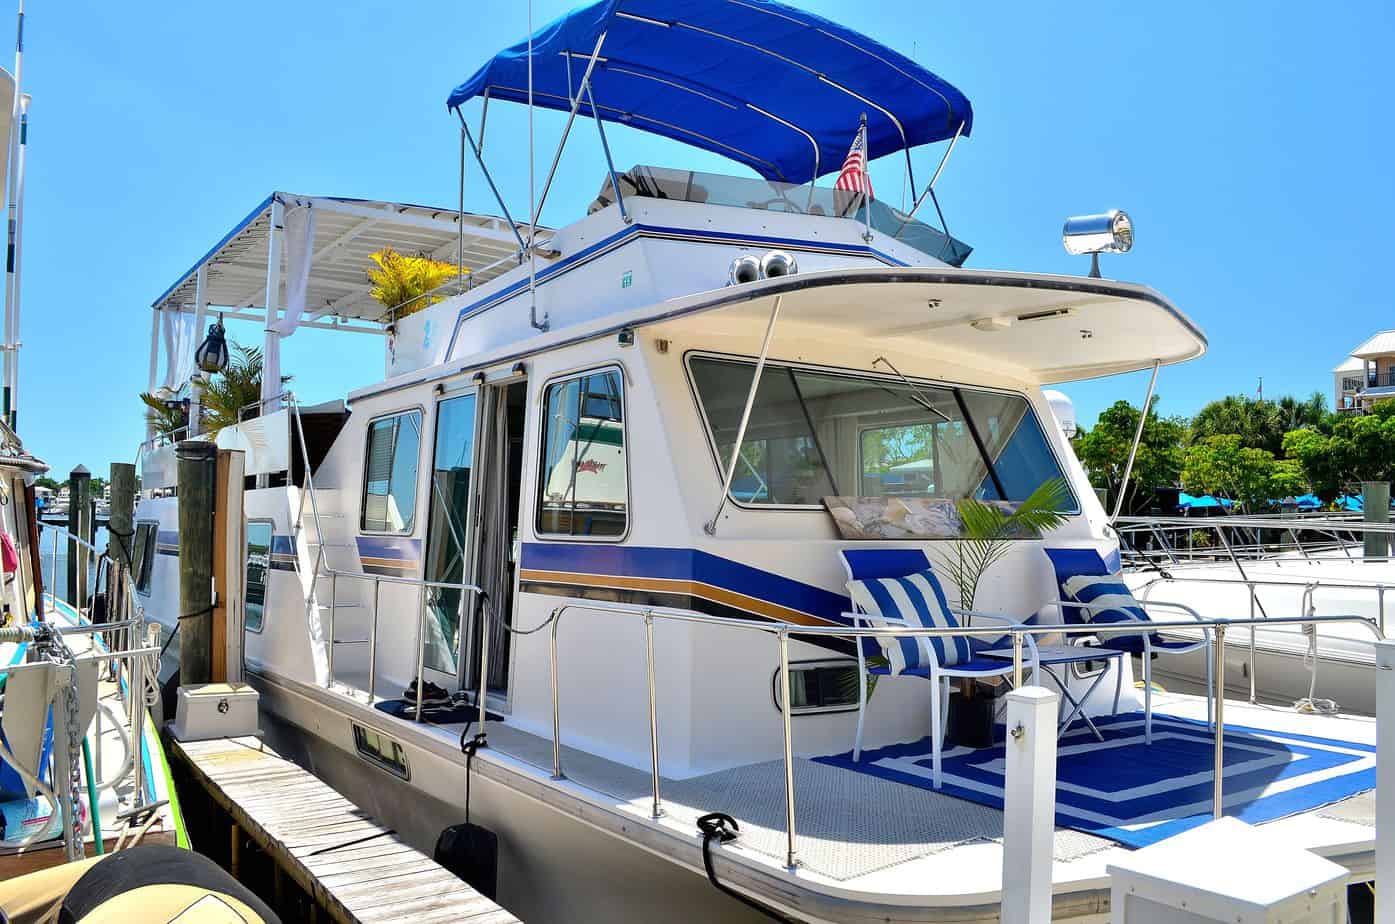 Boat Rentals Naples Fl How About A Houseboat Luggage And Lipstick